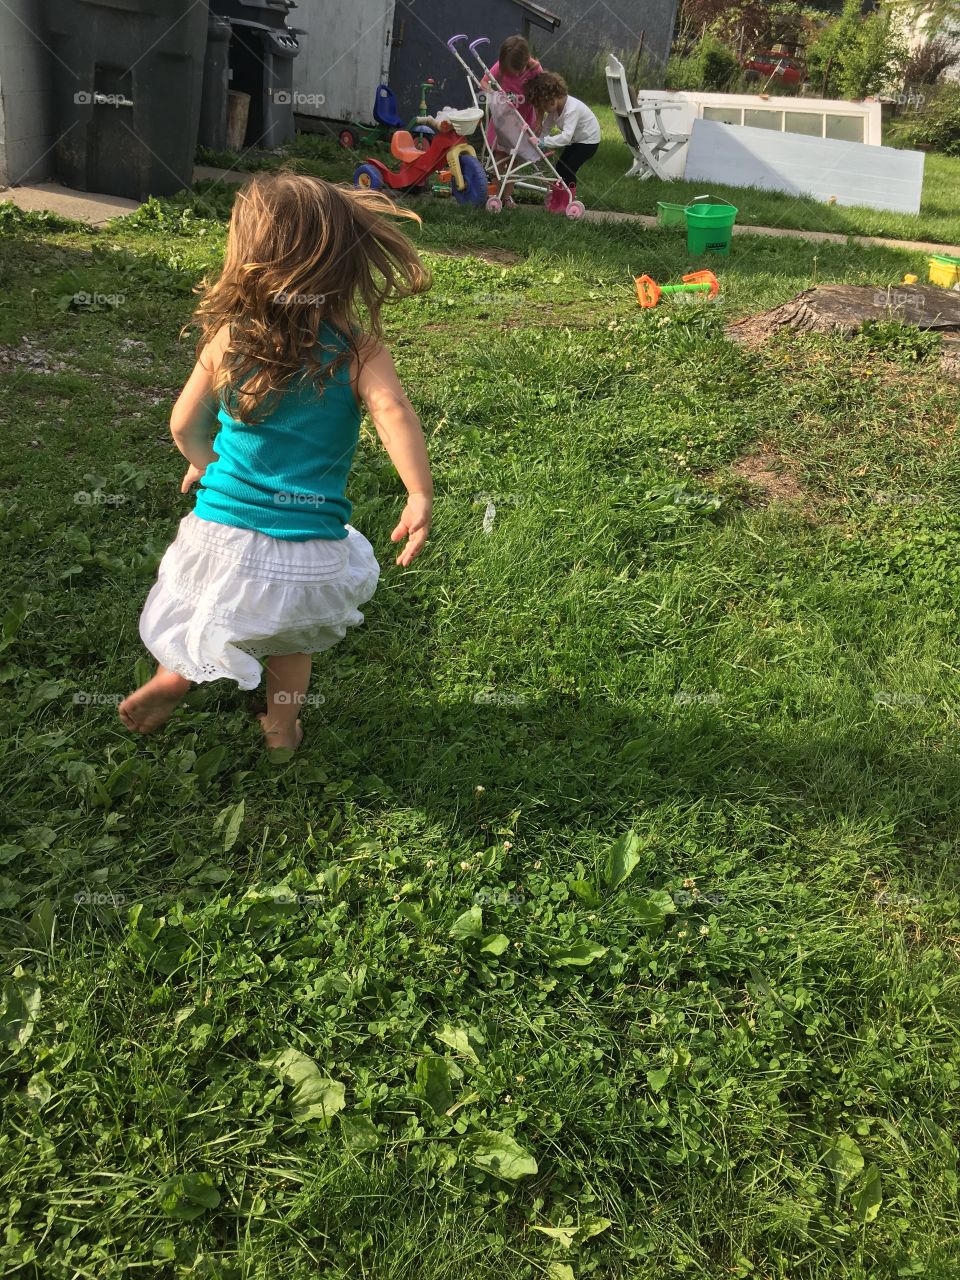 Child, Grass, Summer, People, Outdoors